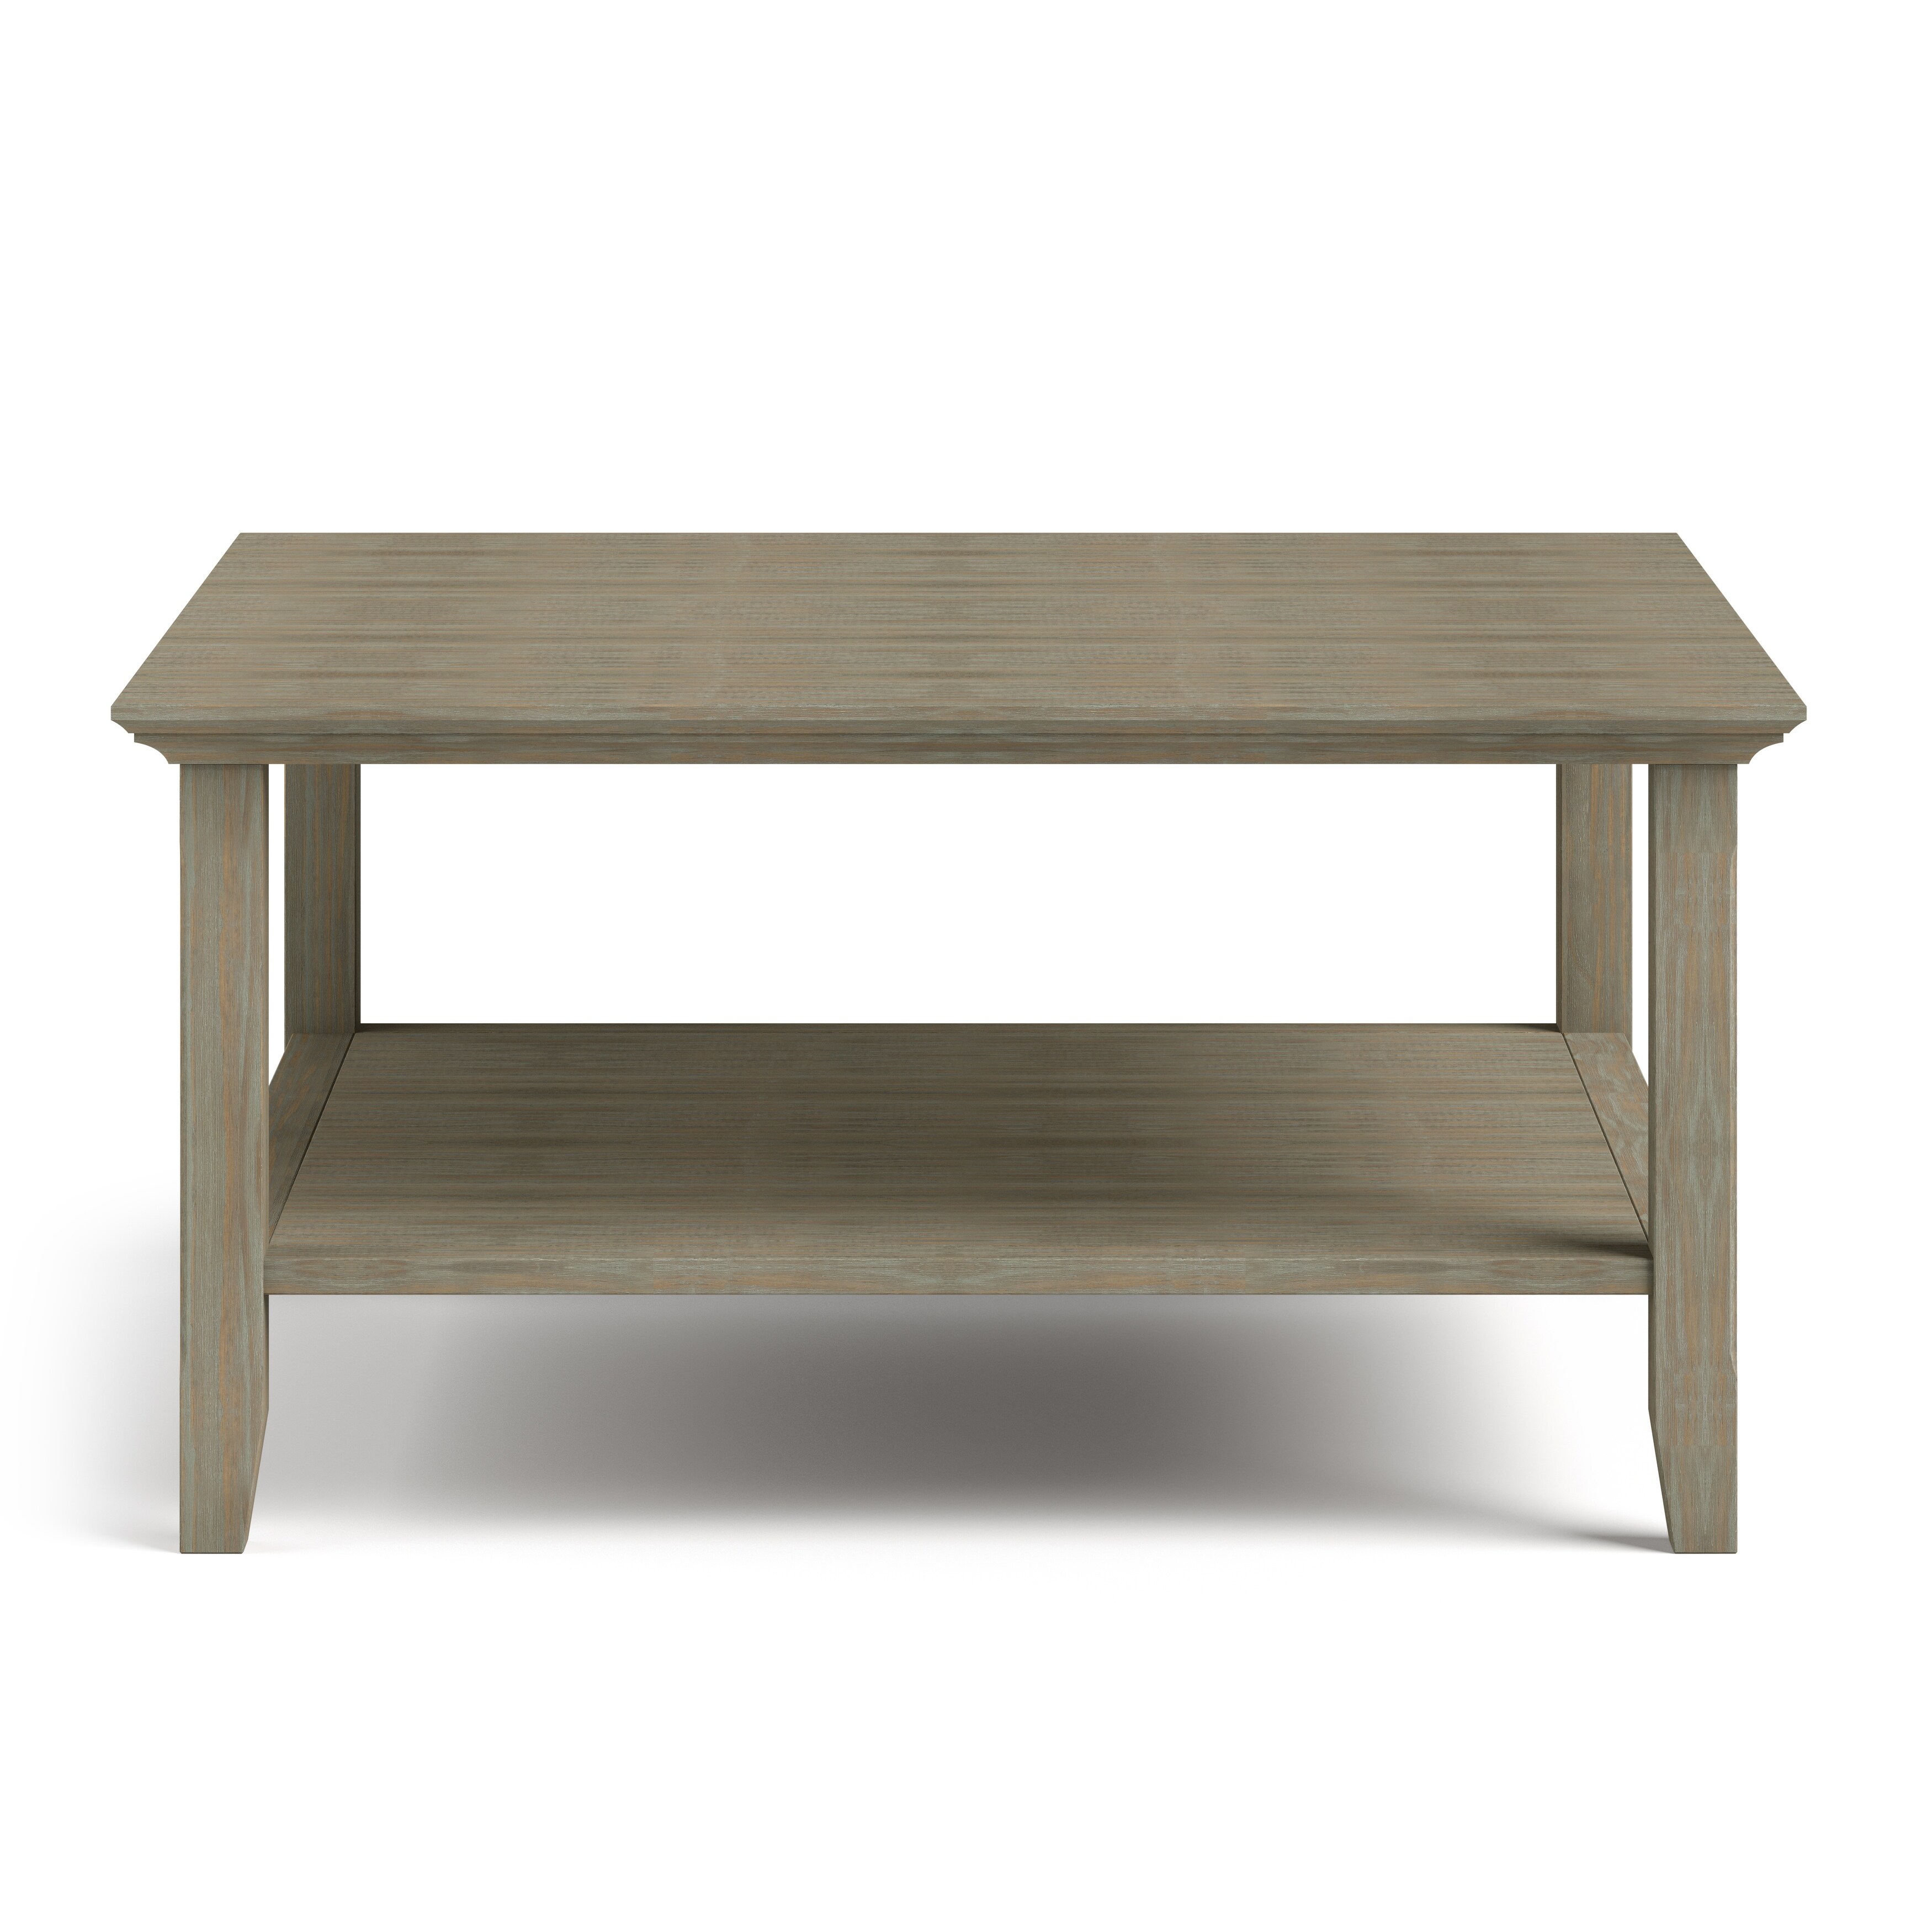 Wyndenhall Normandy Solid Wood 36 Inch Wide Square Rustic Coffee Table Overstock 12151550 Distressed Grey Wood